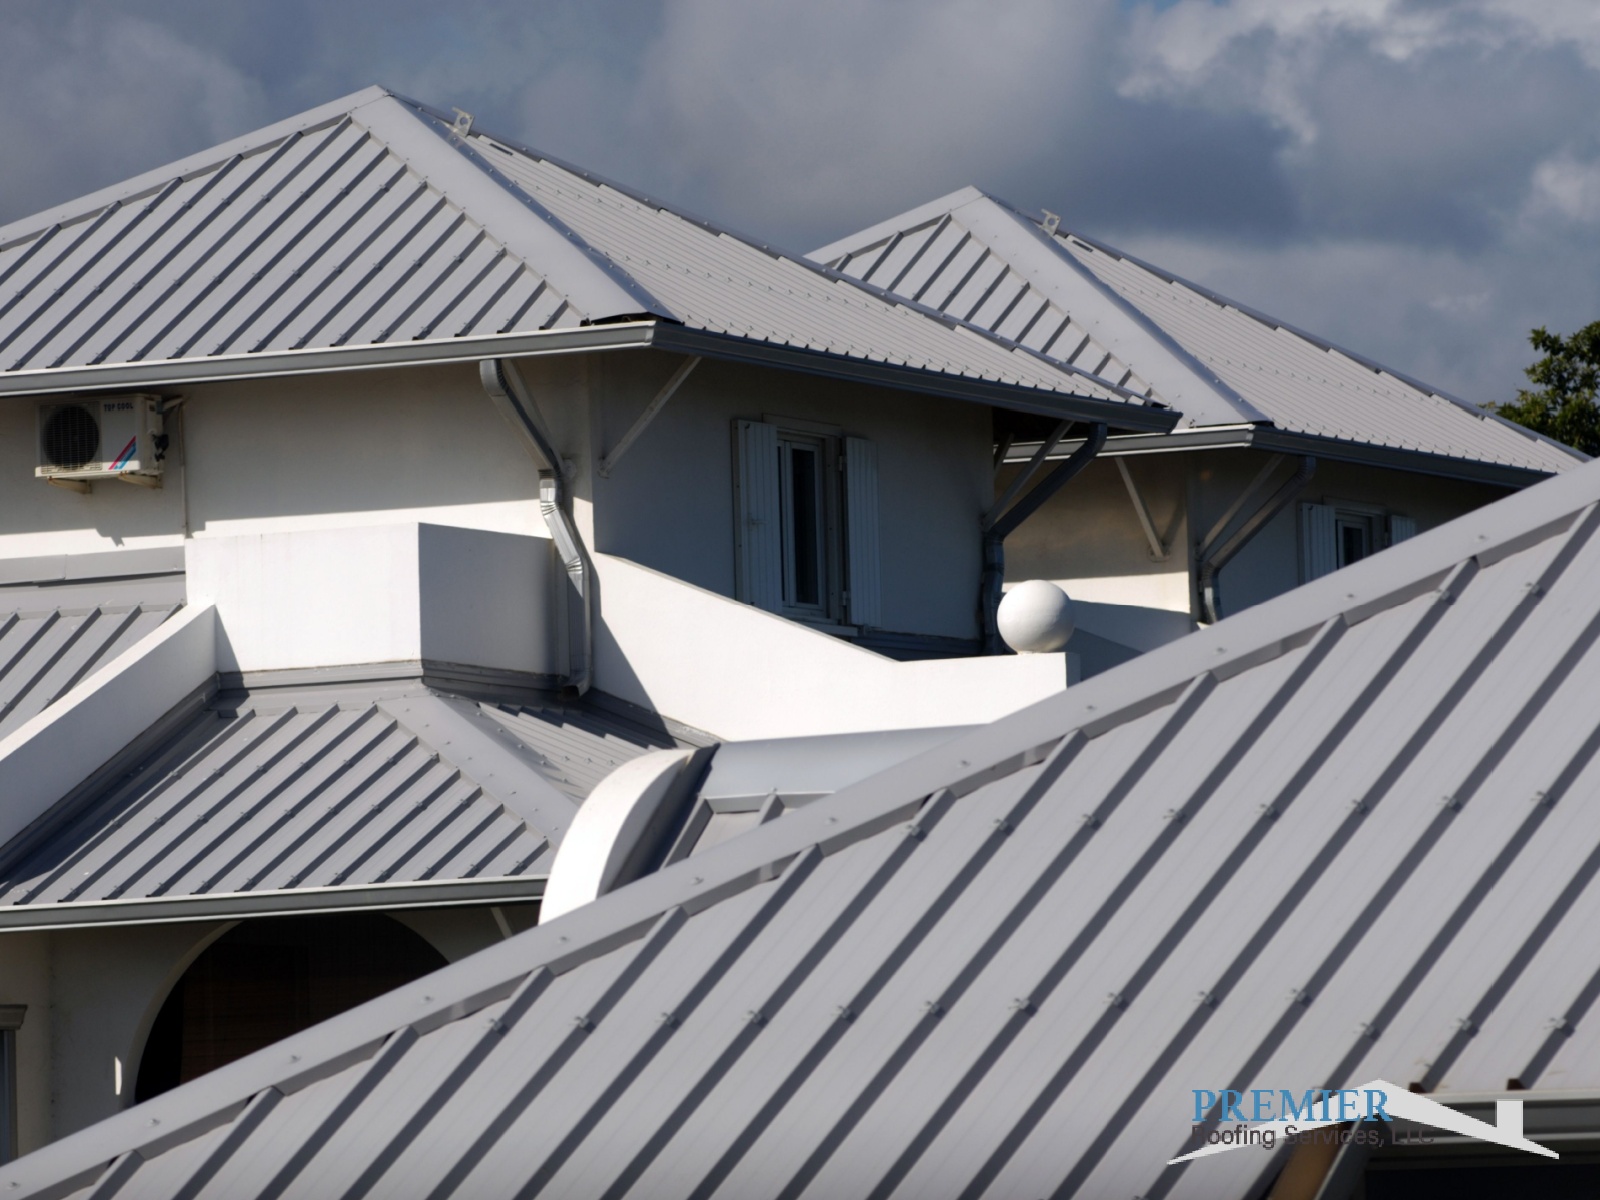 Where To Find A Superior Bonney Lake Metal Roofing Company